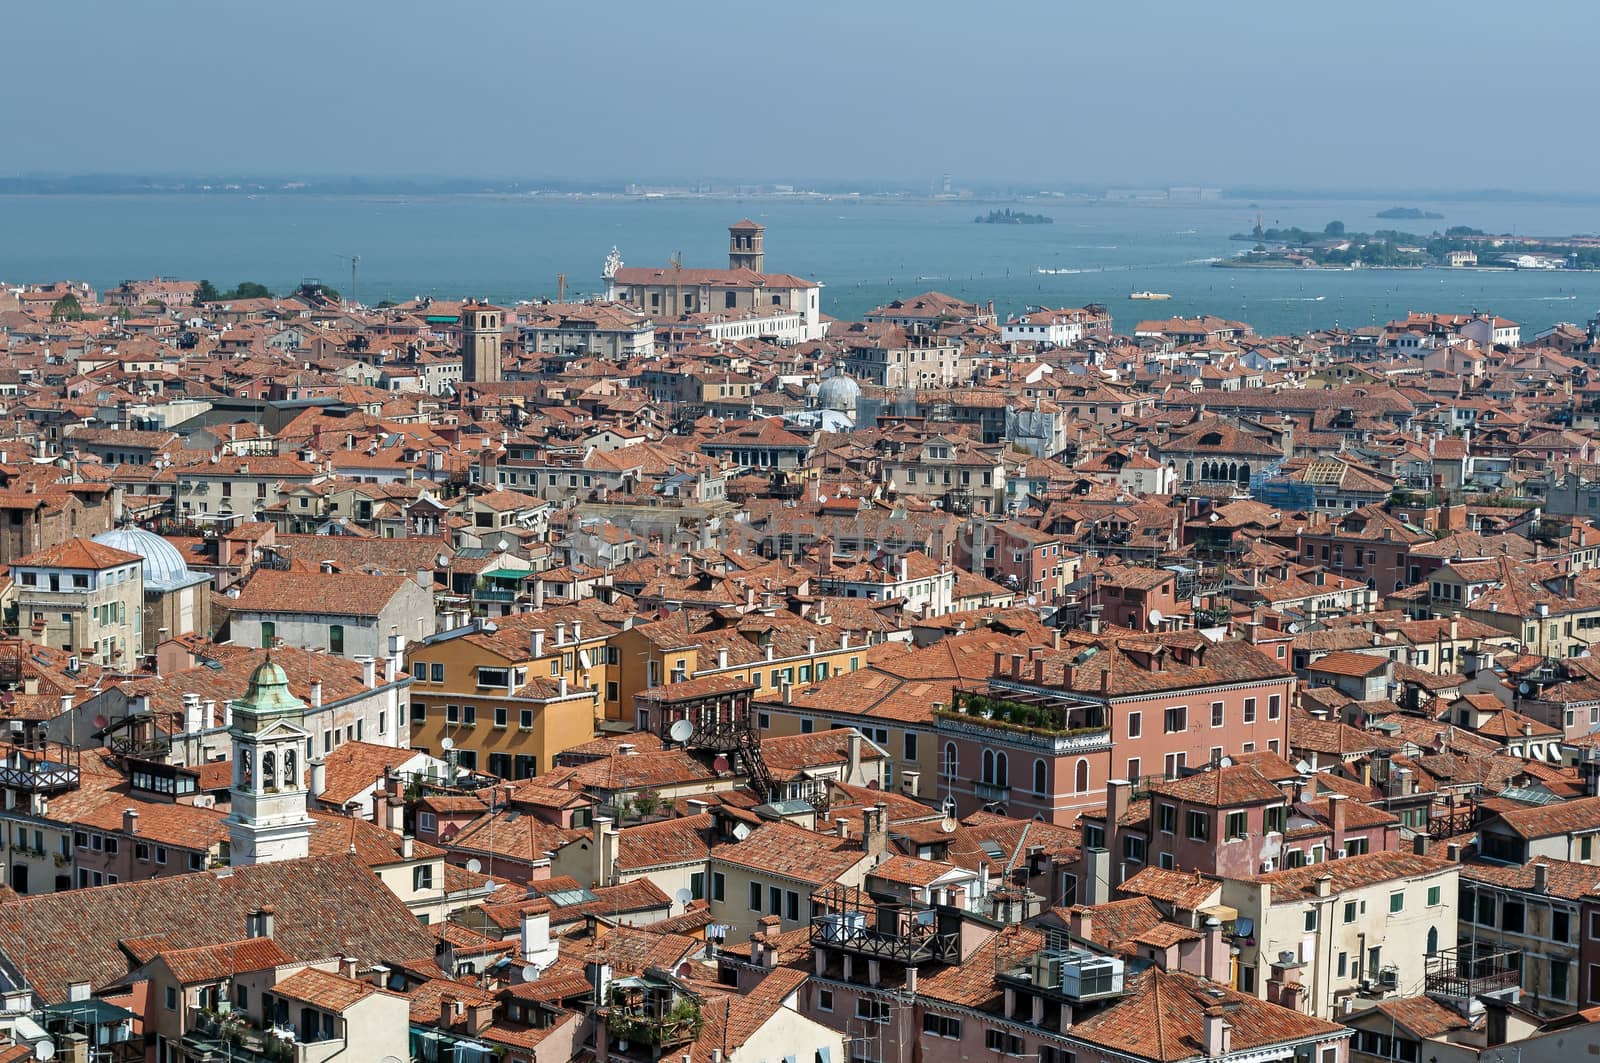 Panoramic view of buildings and houses in Venice, Italy.